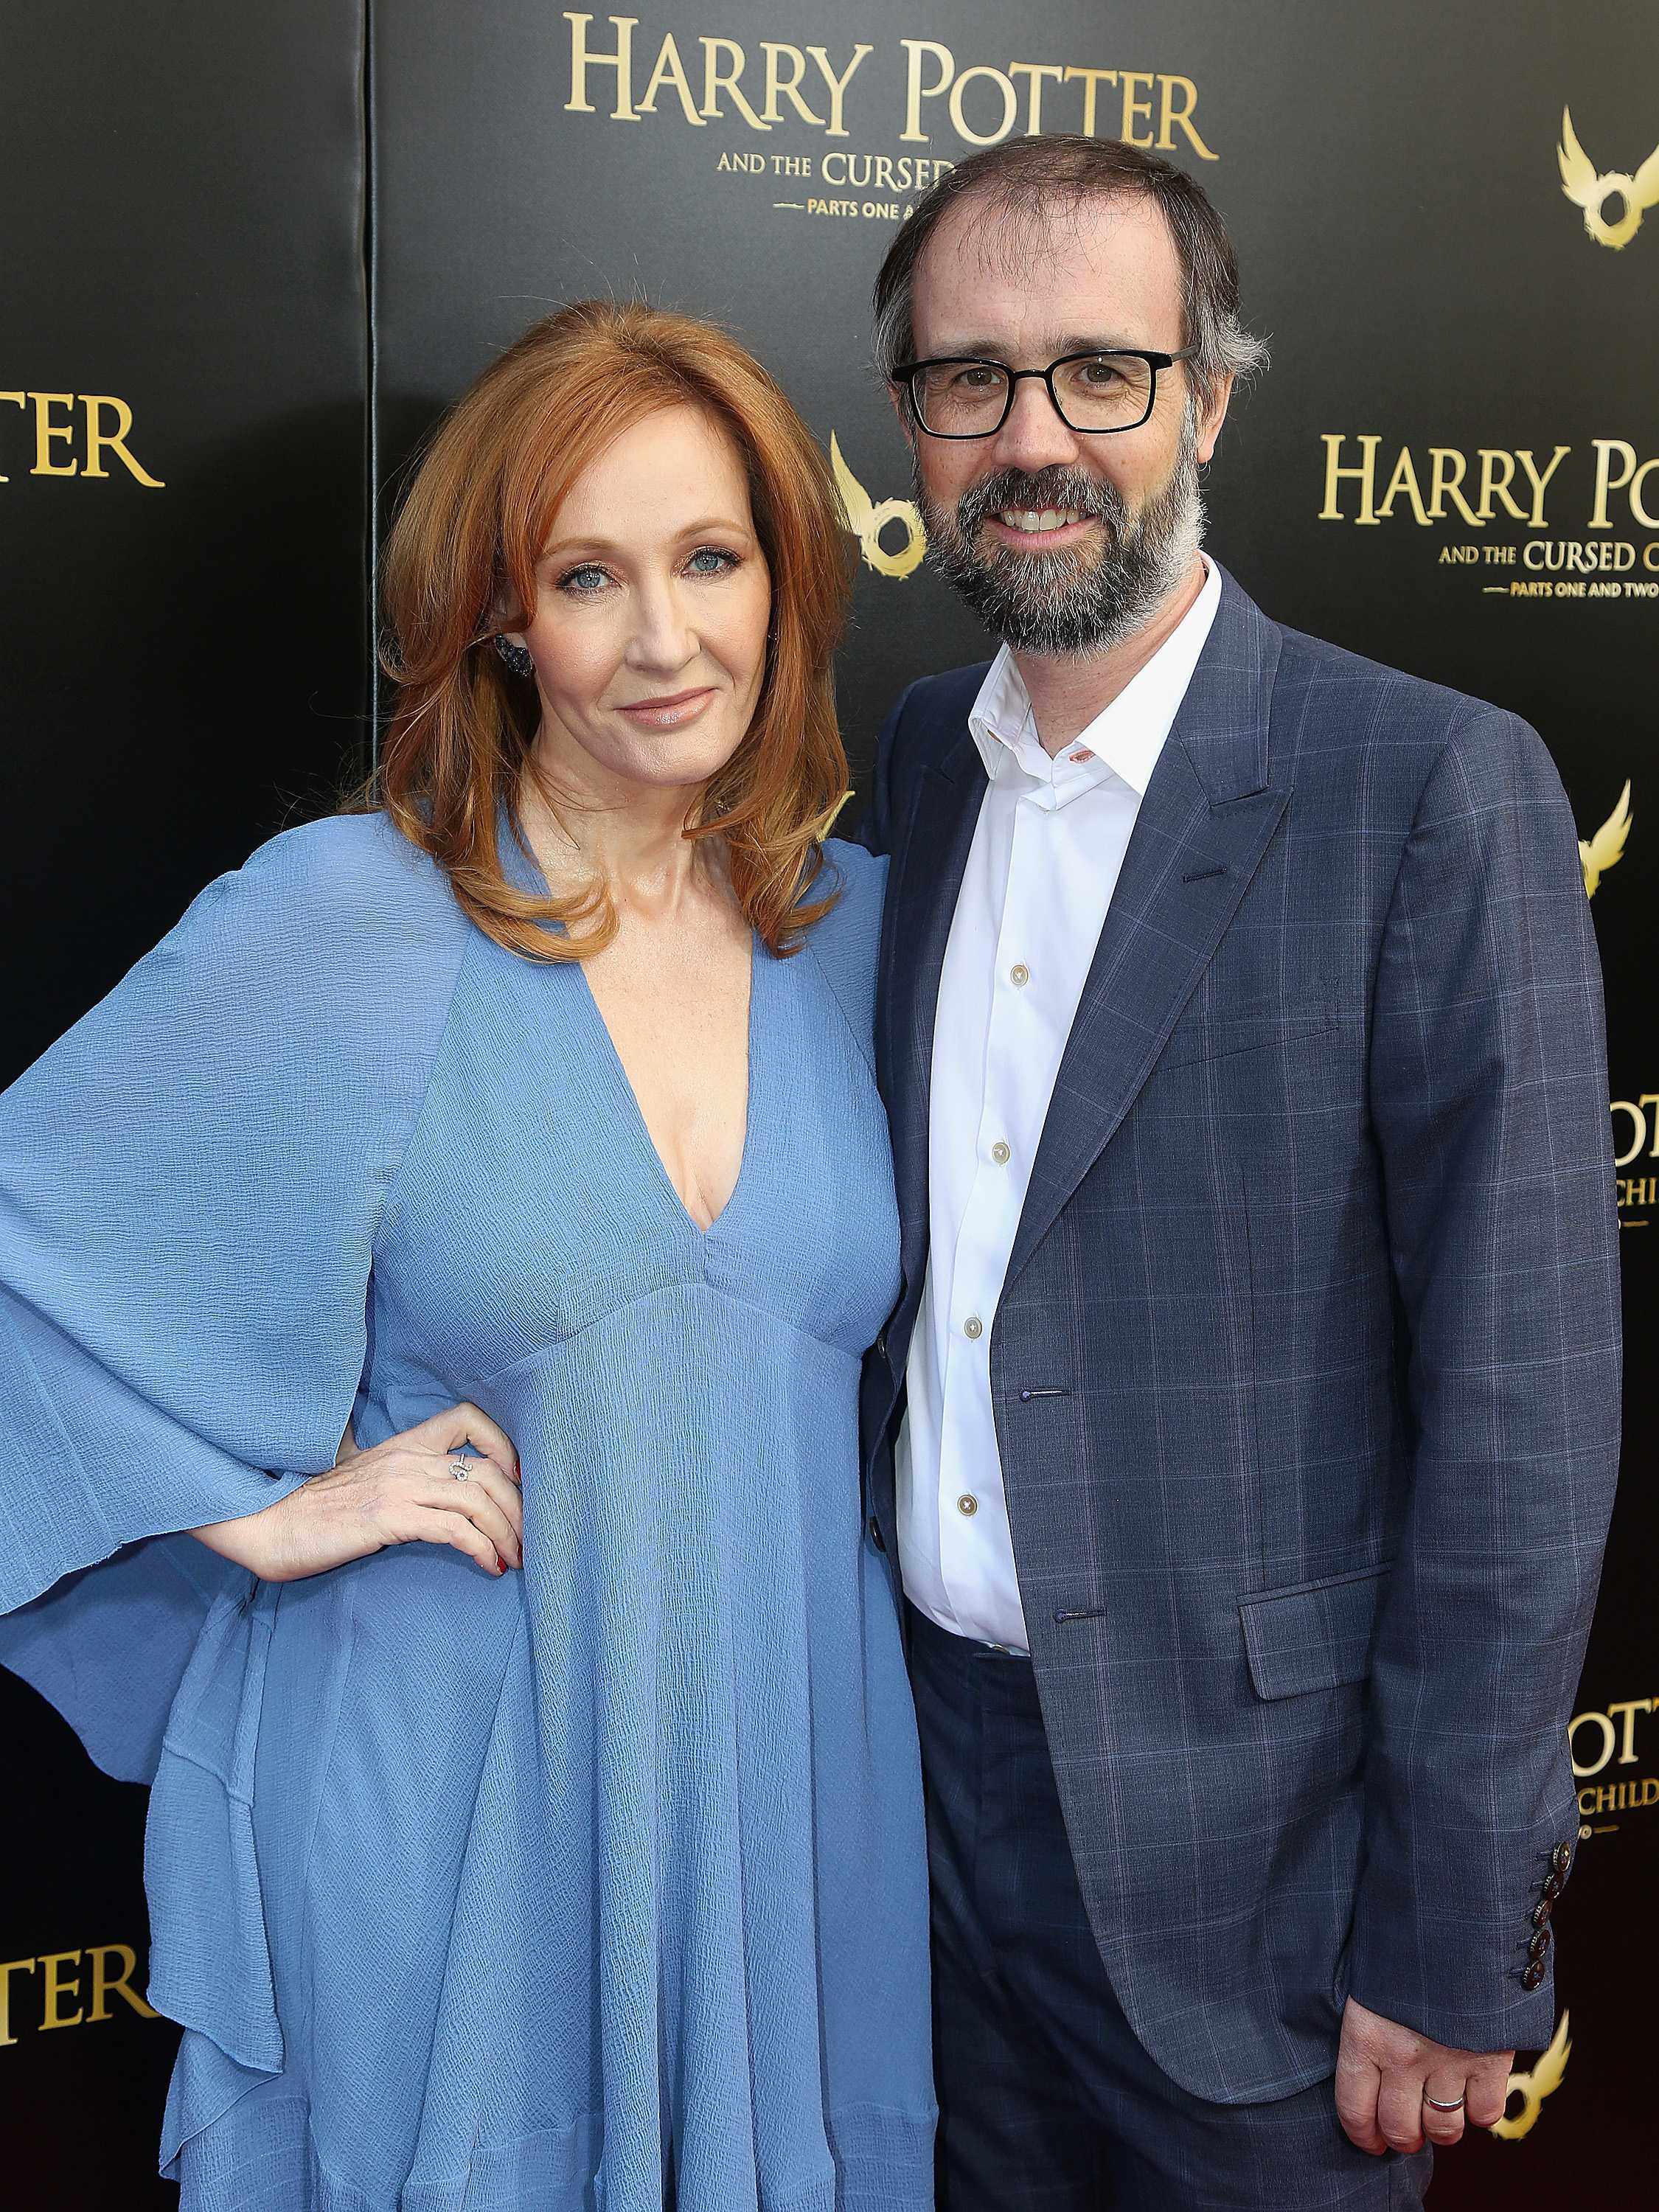 J.K. Rowling and her husband Neil Murray arrive at Harry Potter and The Cursed Child parts 1 and 2 on Broadway opening night at The Lyric Theatre in April 2018, in New York City. Photo: FilmMagic